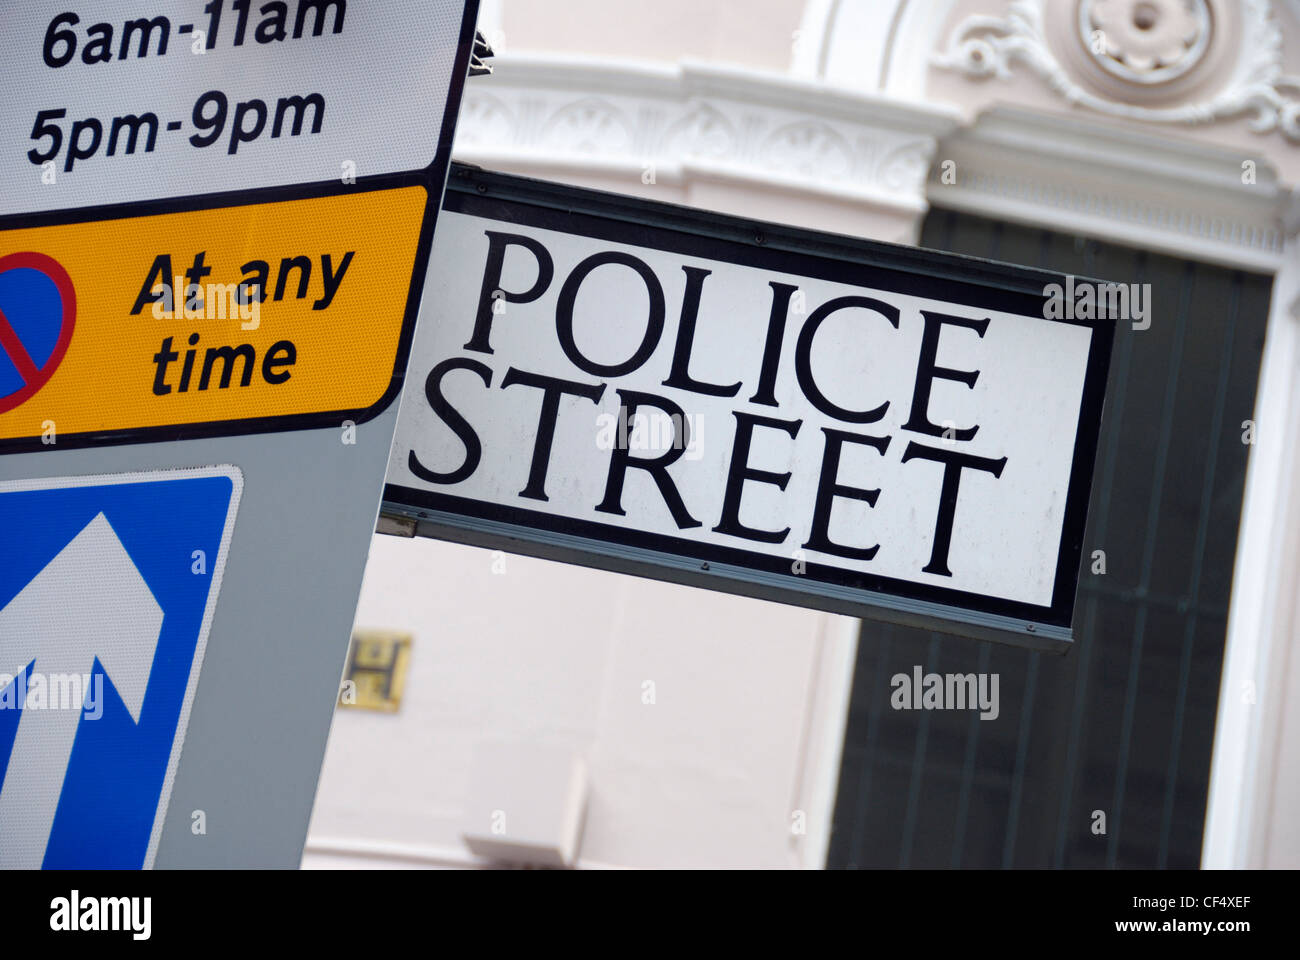 'Police Street' street sign and traffic control signs. Stock Photo